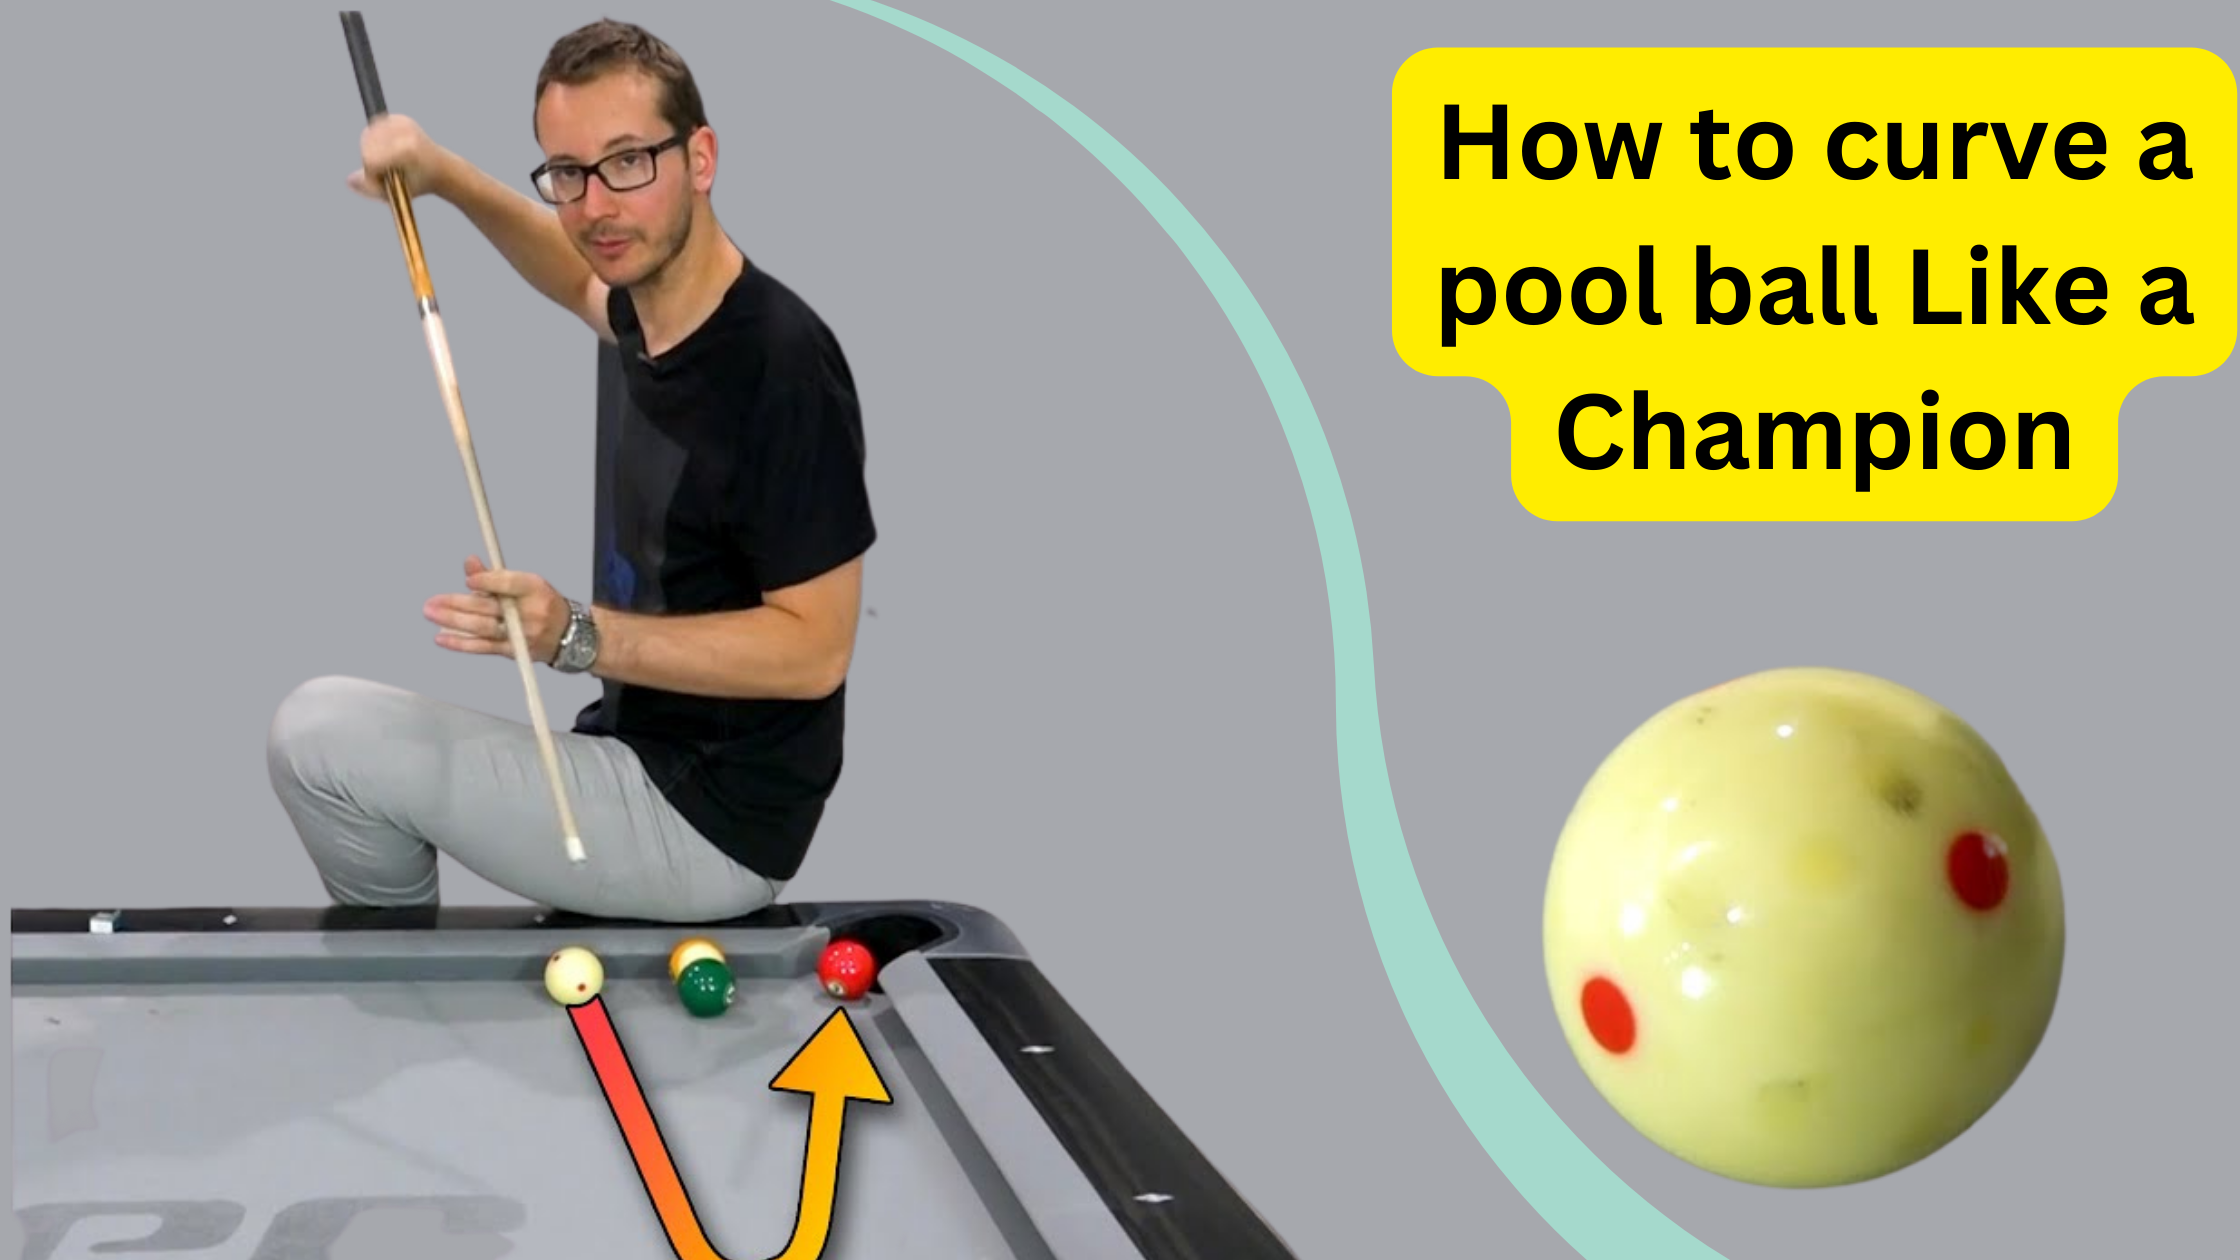 Professional Tips on How to curve a pool ball Like a Champion